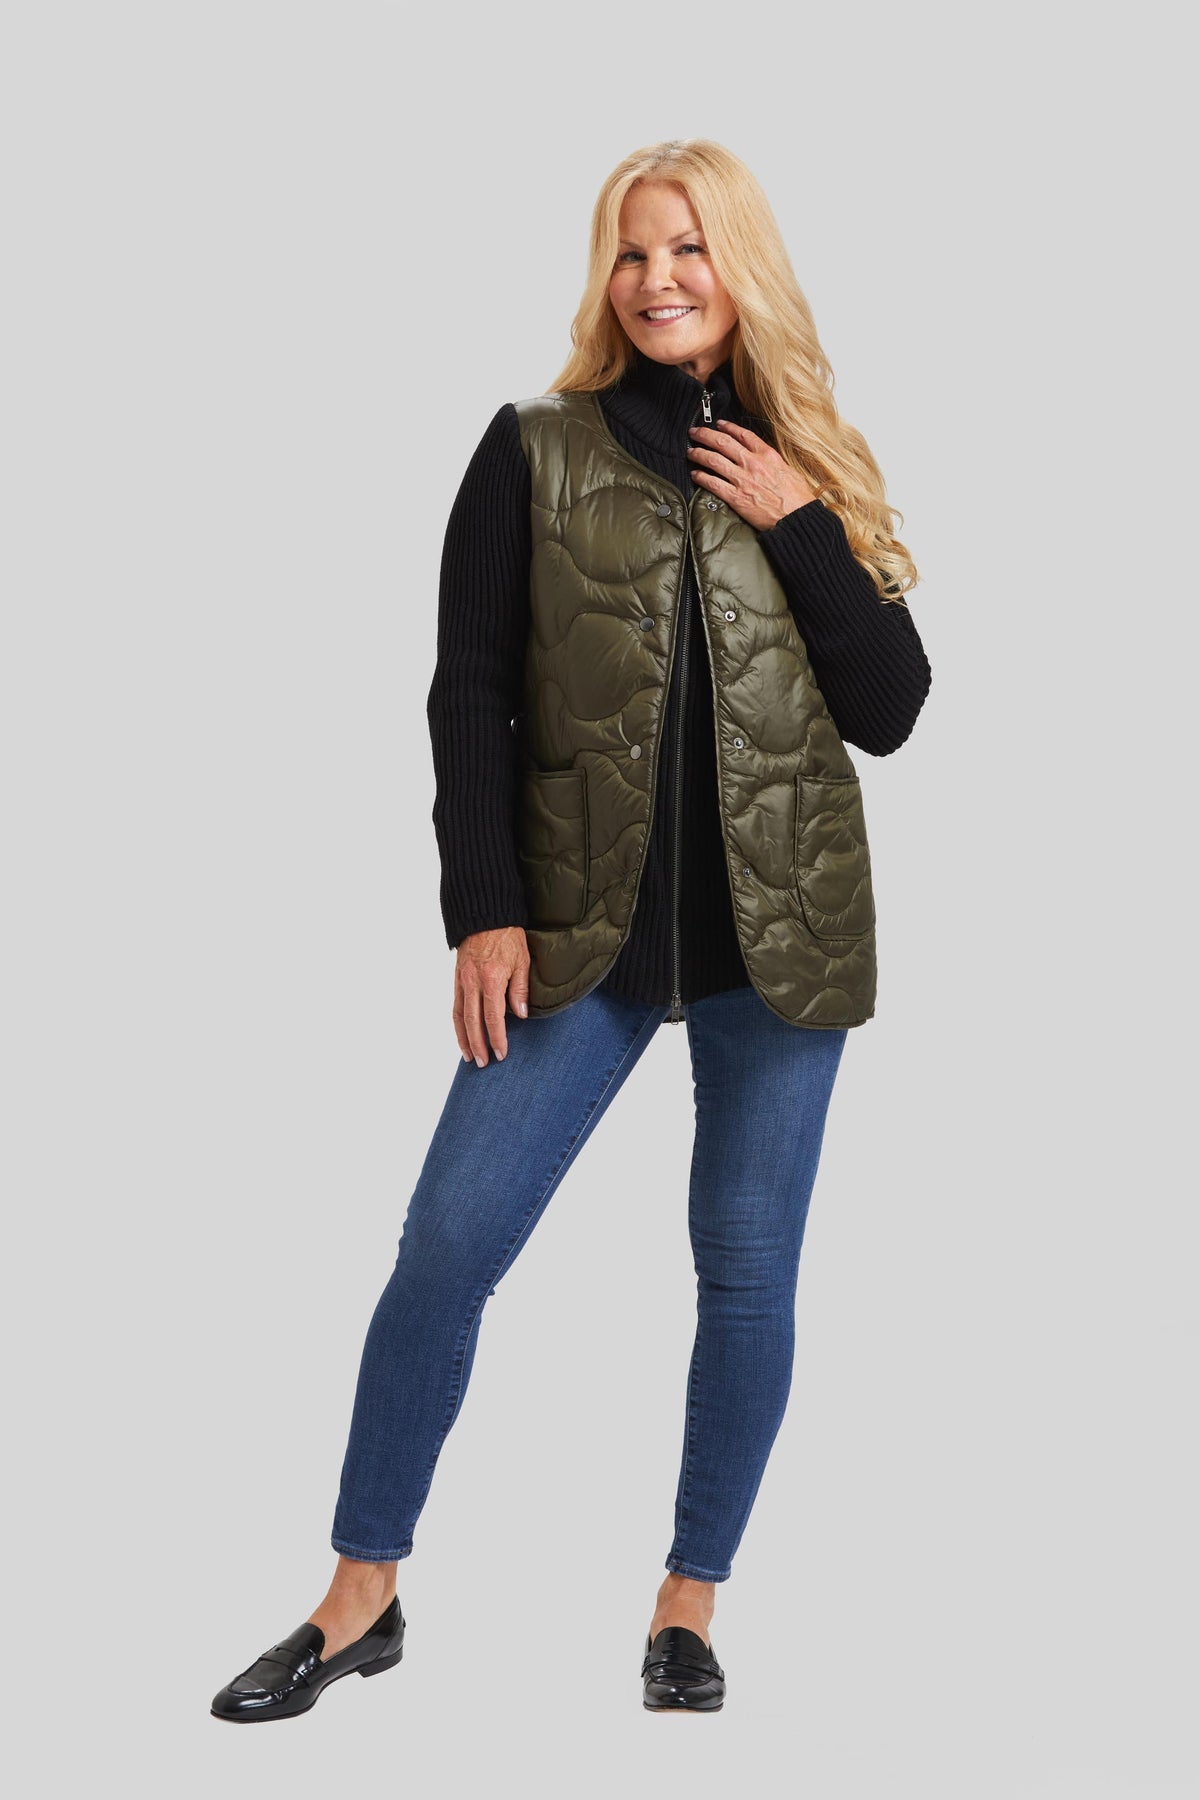 Quilted Go To's Knit Combo Jacket in Olive/Black